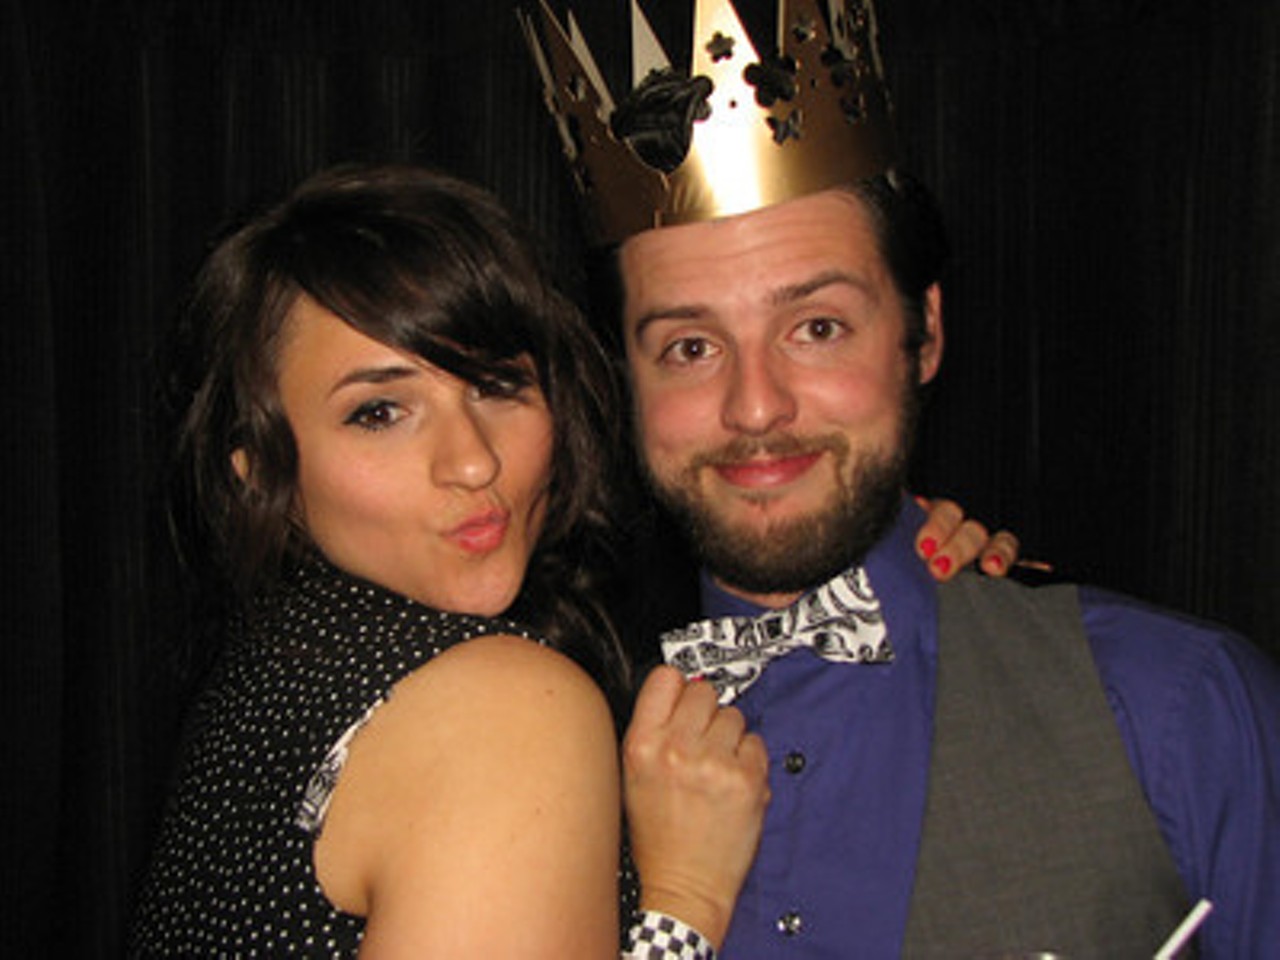 30 Photos from the Red Eye Photobooth at Scene's Best of Cleveland 2014 Party